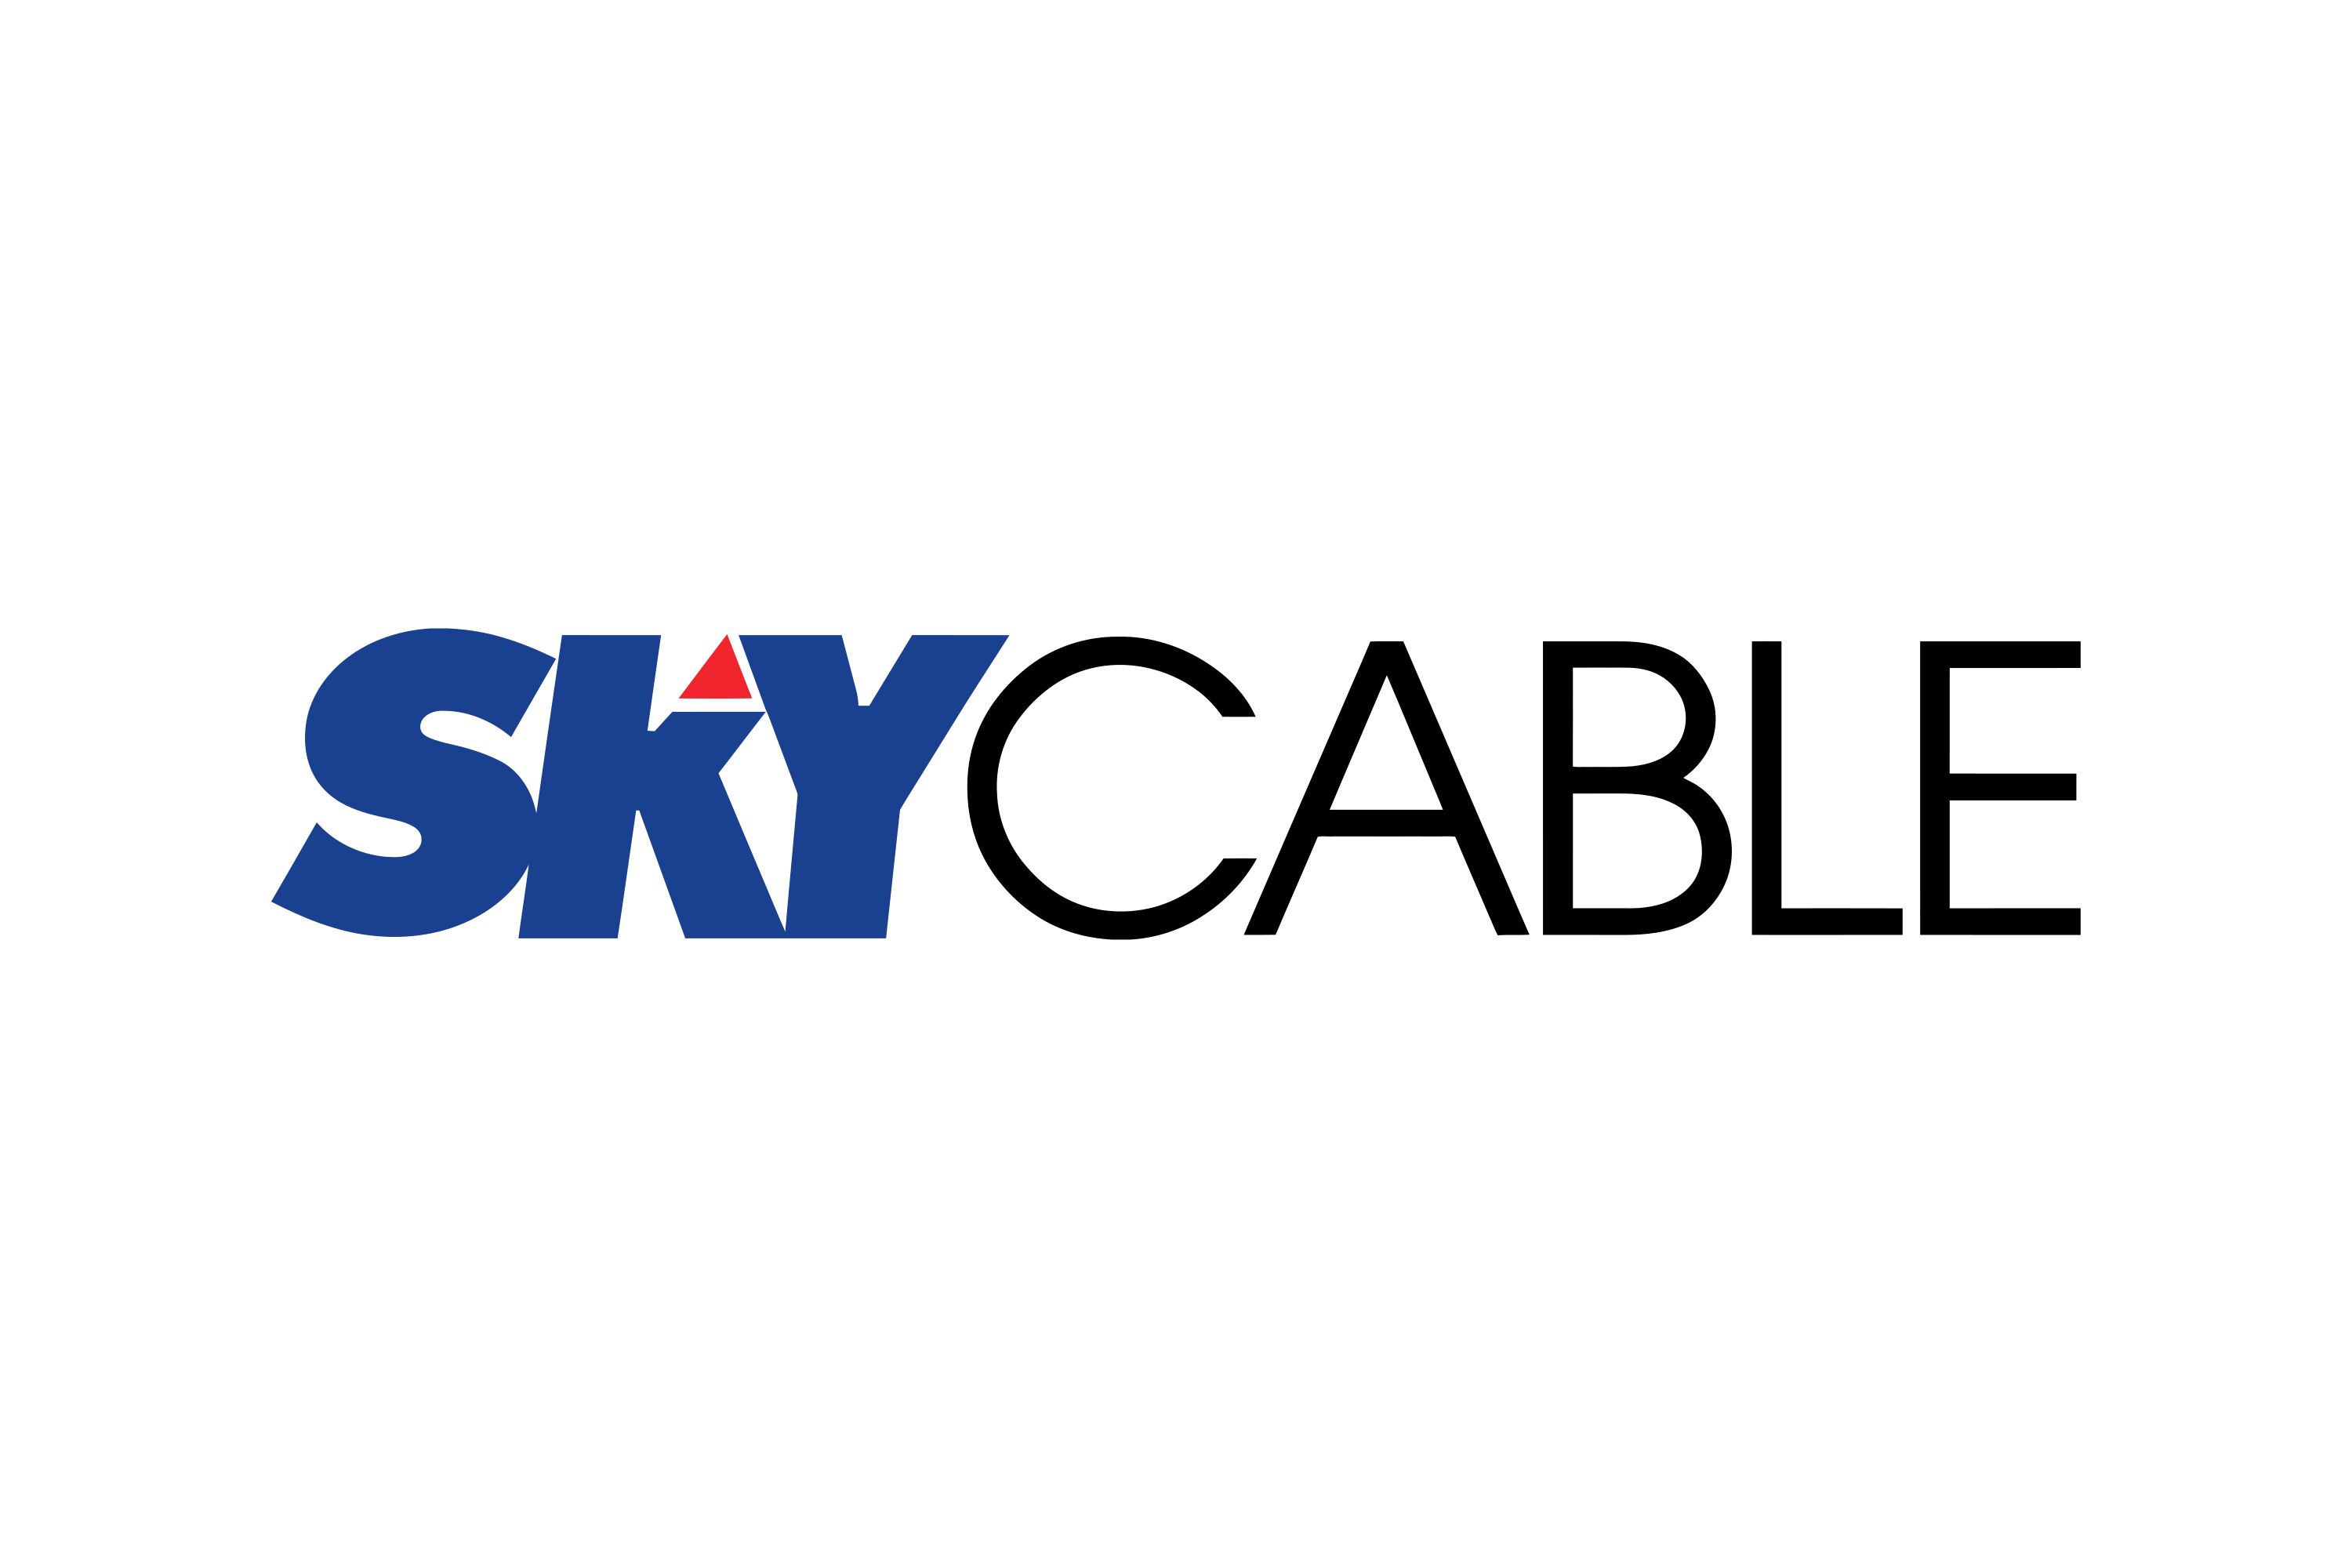 cable logo